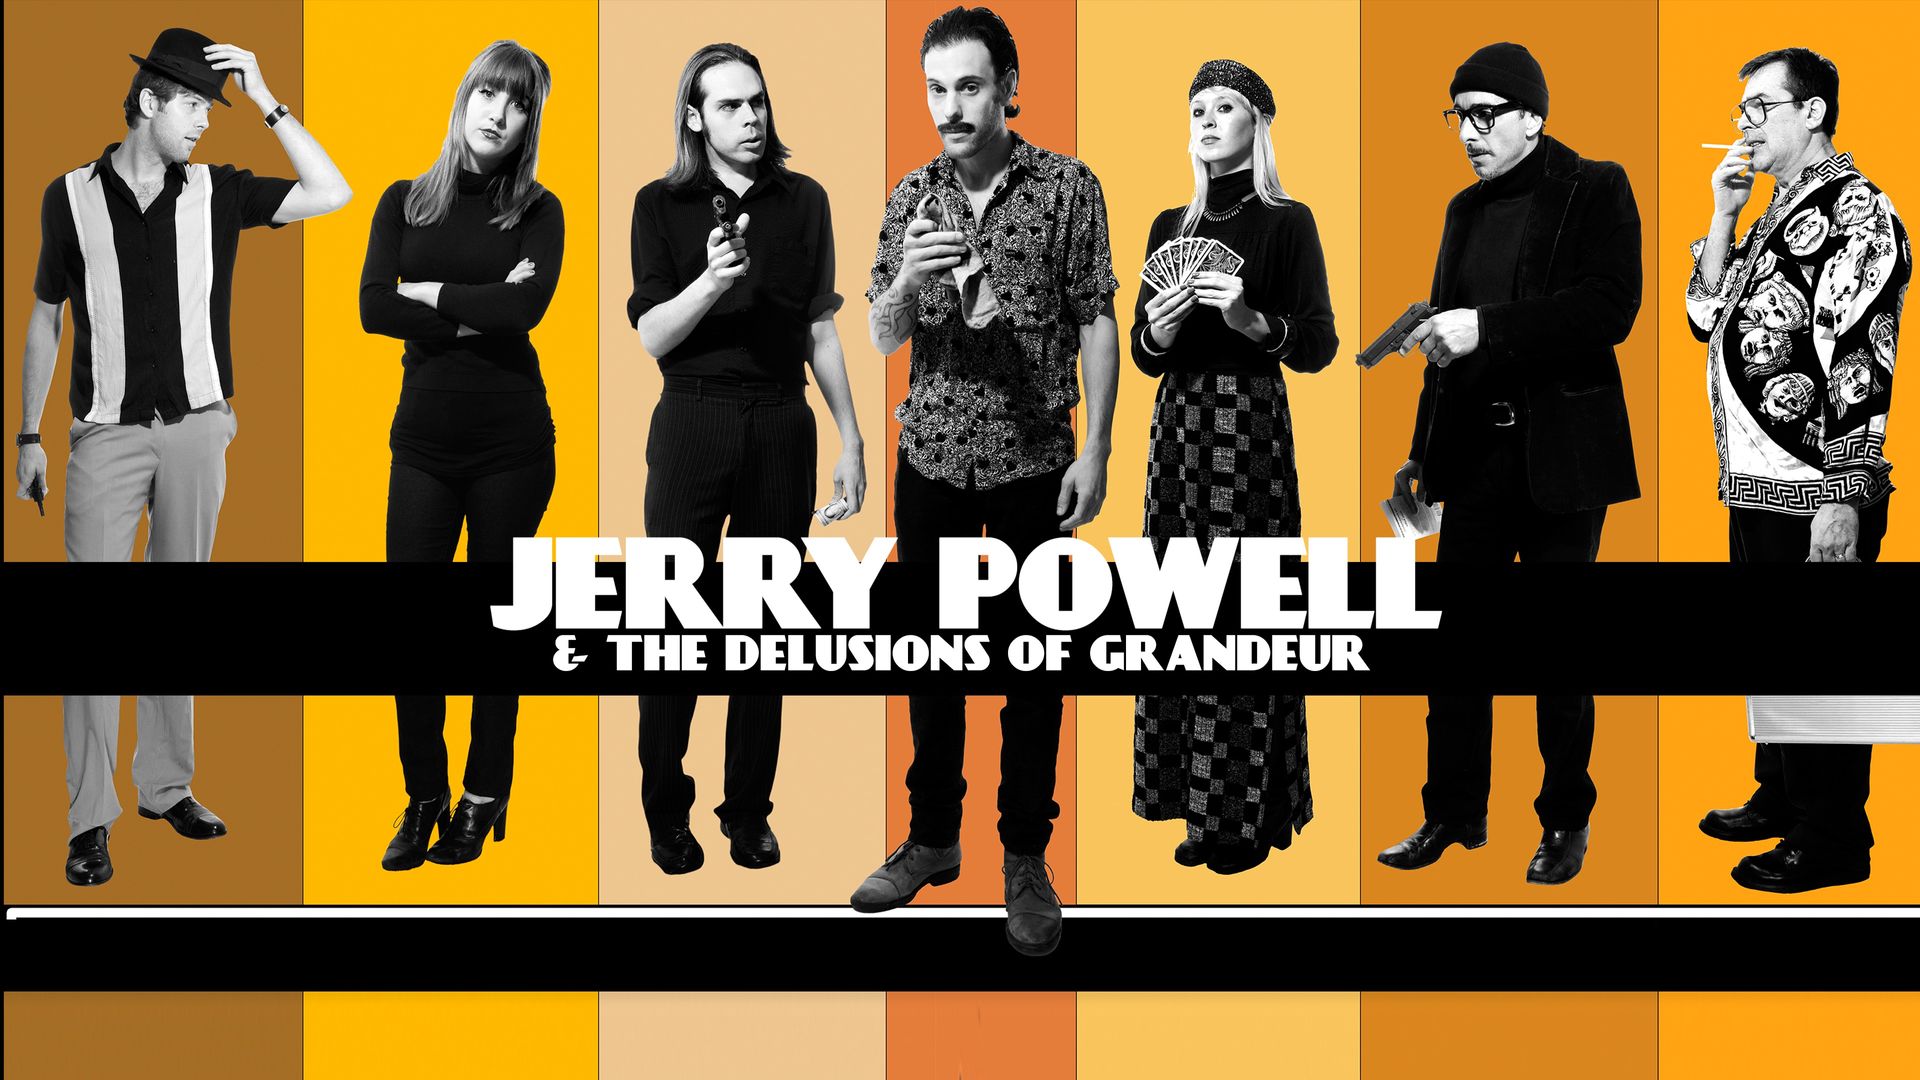 Jerry Powell & the Delusions of Grandeur Backdrop